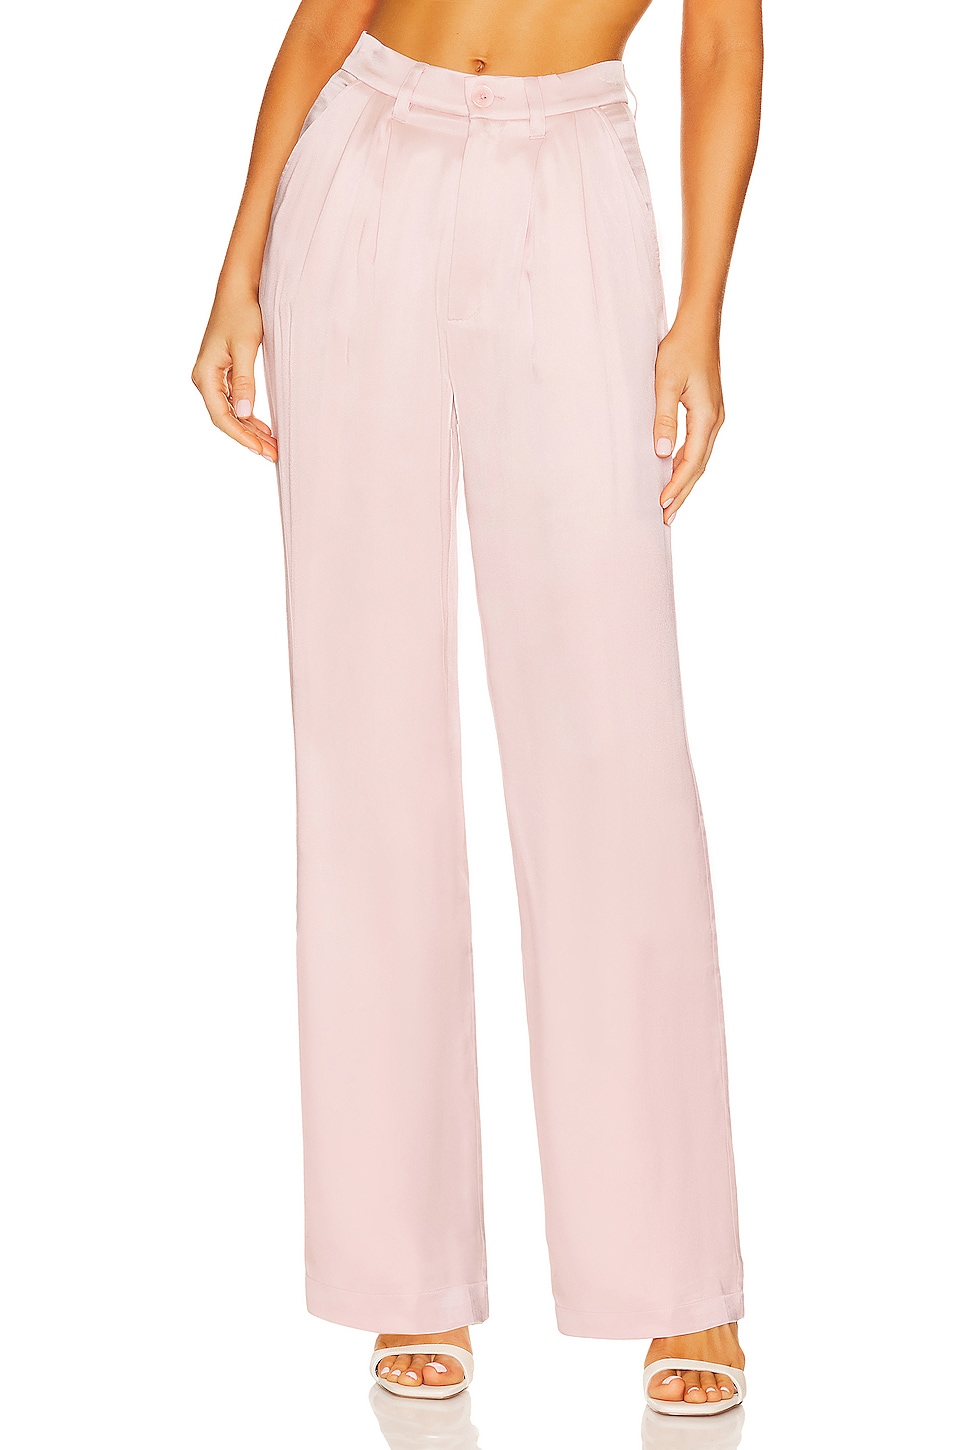 ANINE BING Carrie Pant in Lavender